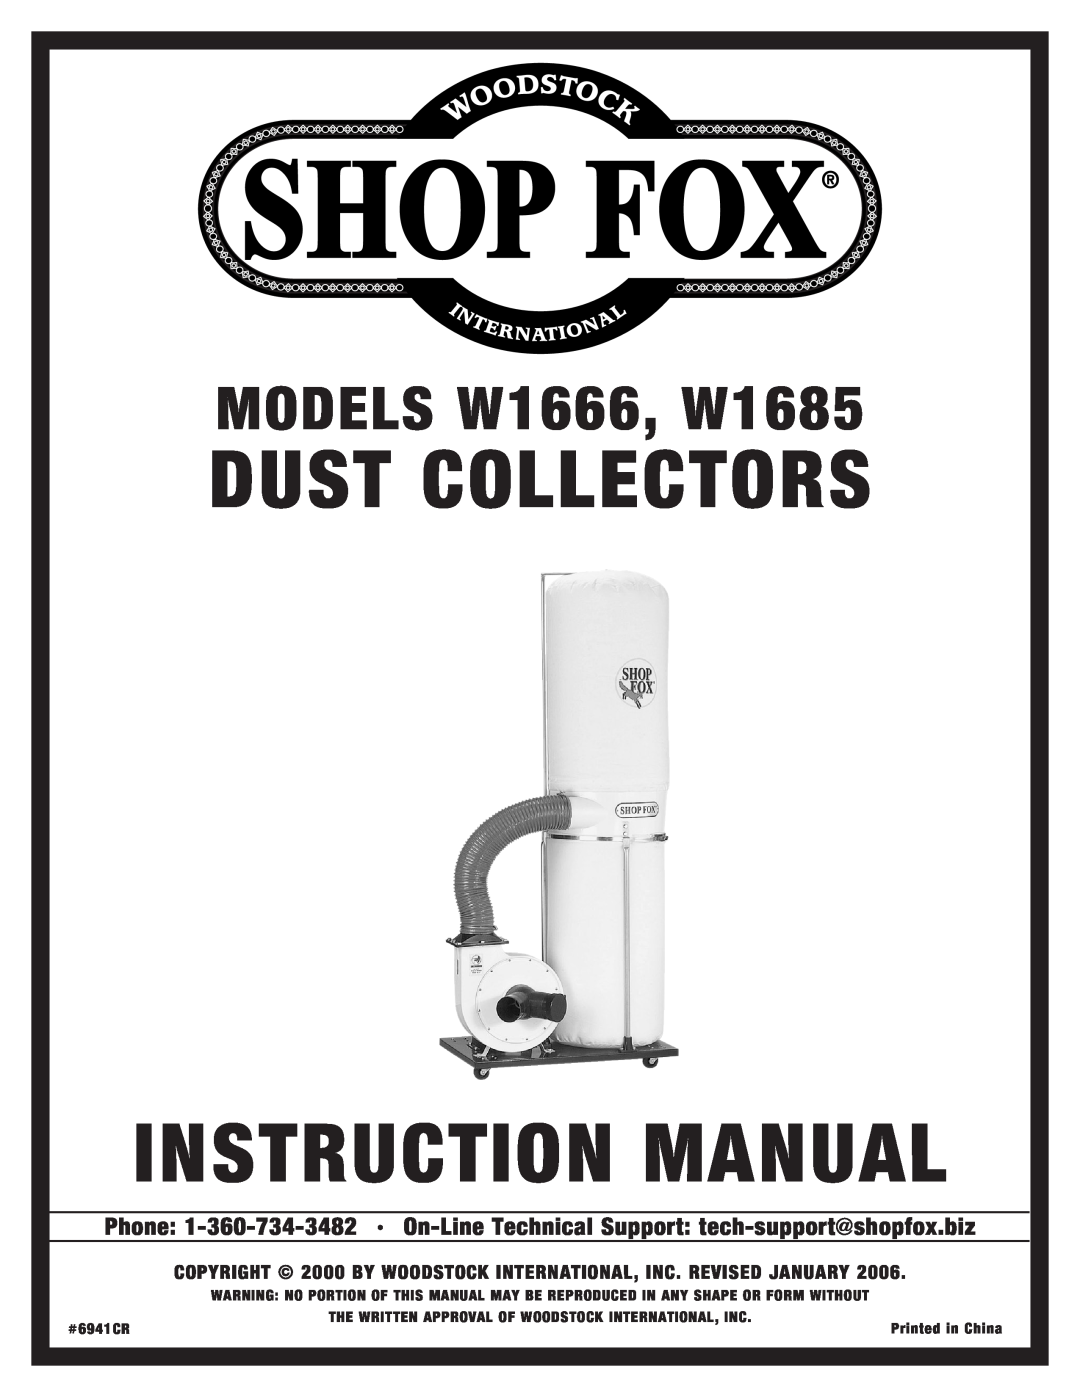 Woodstock instruction manual Dust Collectors, Instruction Manual, MODELS W1666, W1685, #6941CR, Printed in China 